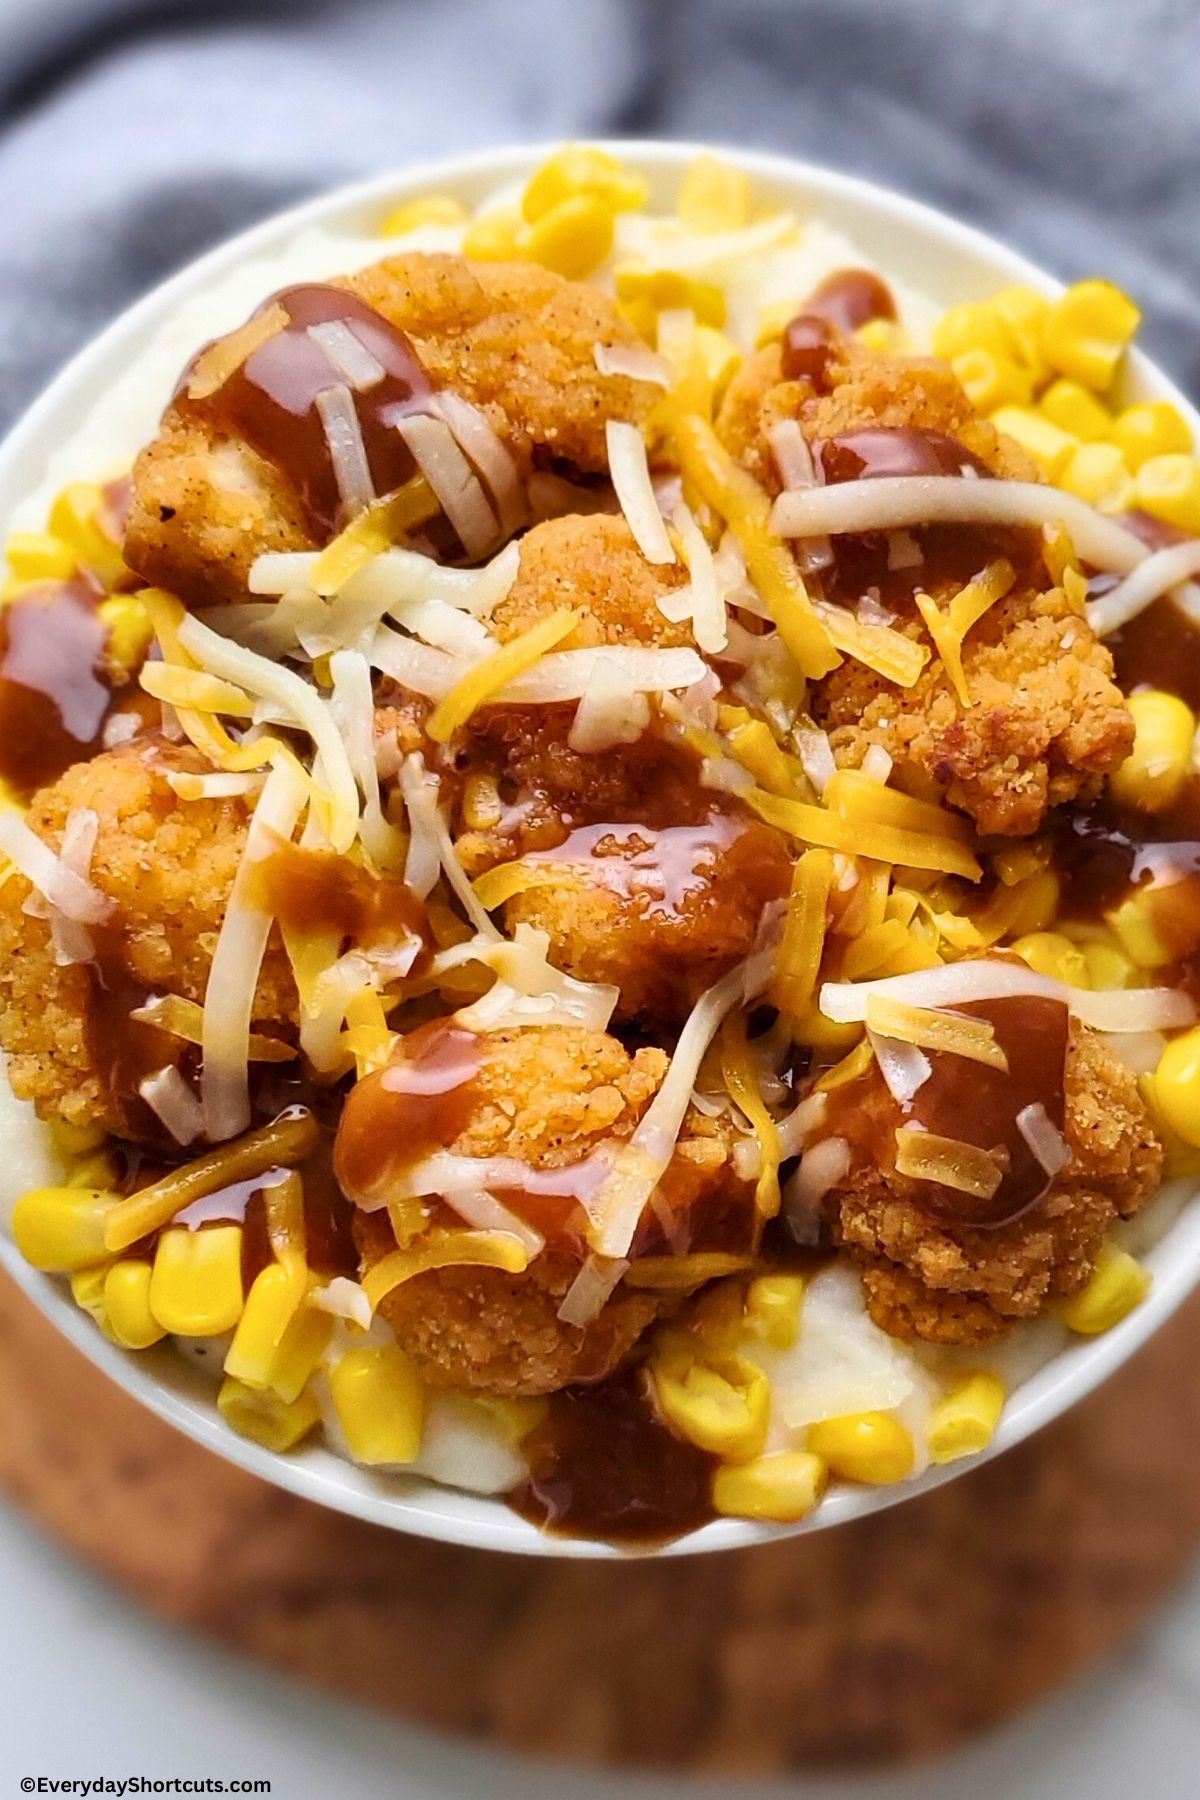 KFC famous bowl copycat meal in a bowl